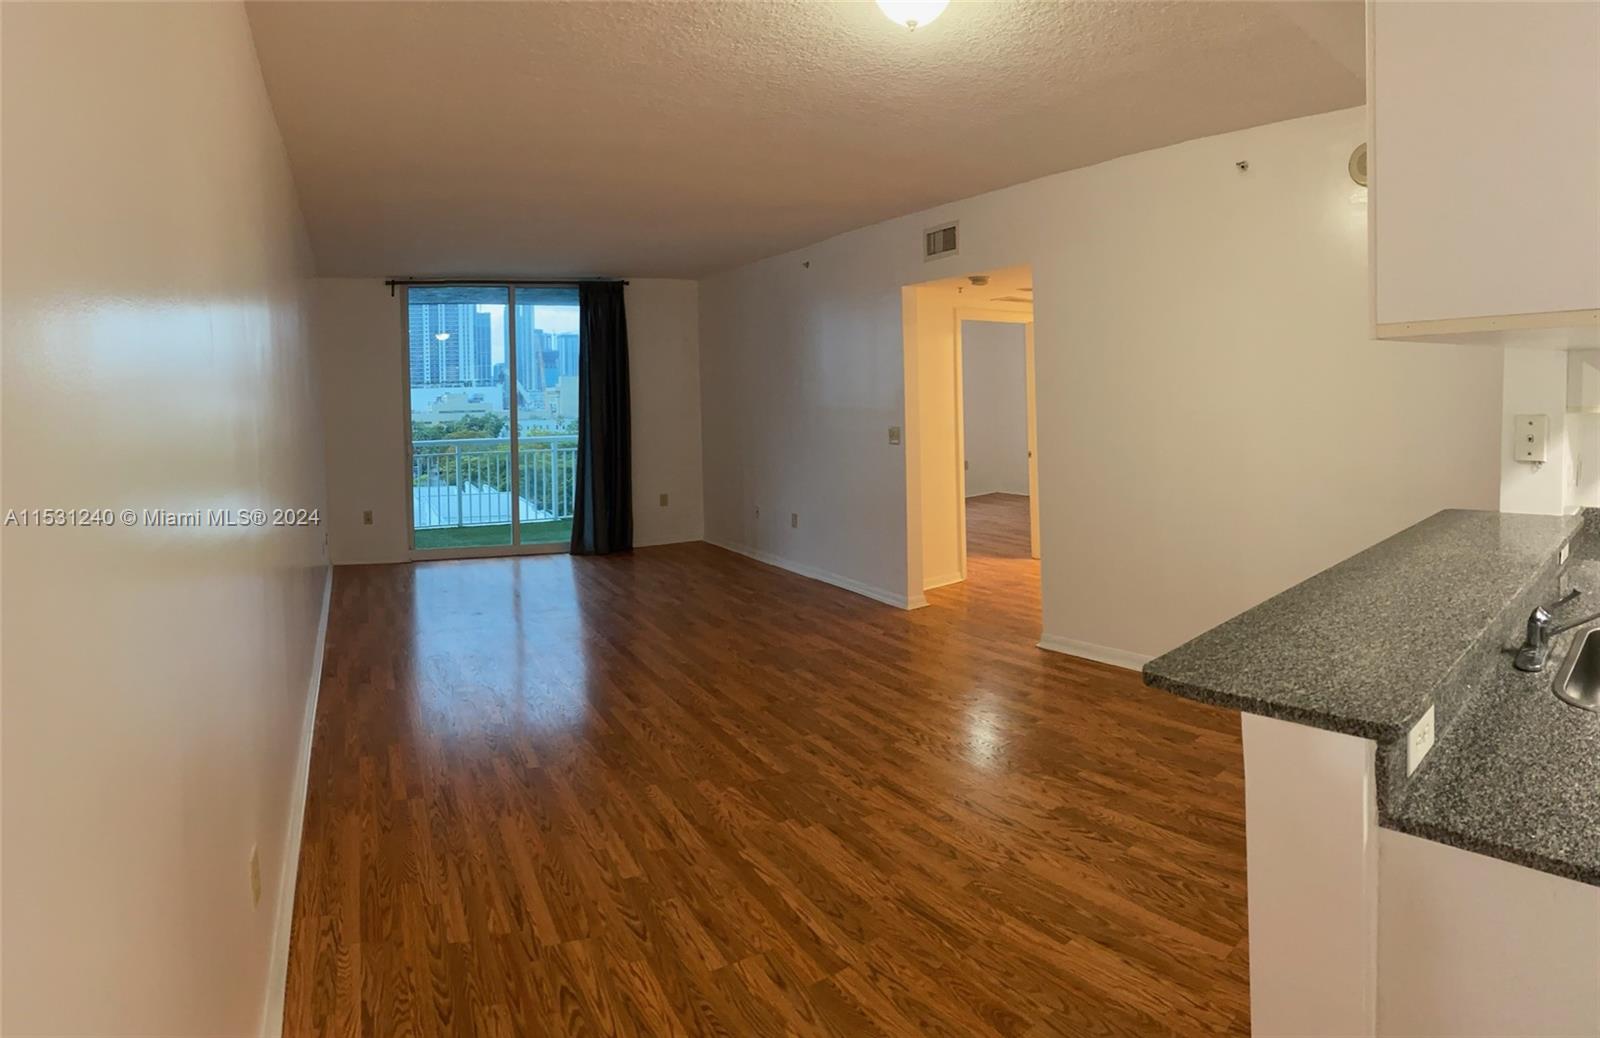 Spacious 2/2 Corner unit. Great Location right on Biscayne Blvd. Offers granite countertops, ample vanities. Laminated floors throughout. Downtown and Bay views, pool and gym. Walking distance to supermarkets, restaurants, shops, banks and public transportation.